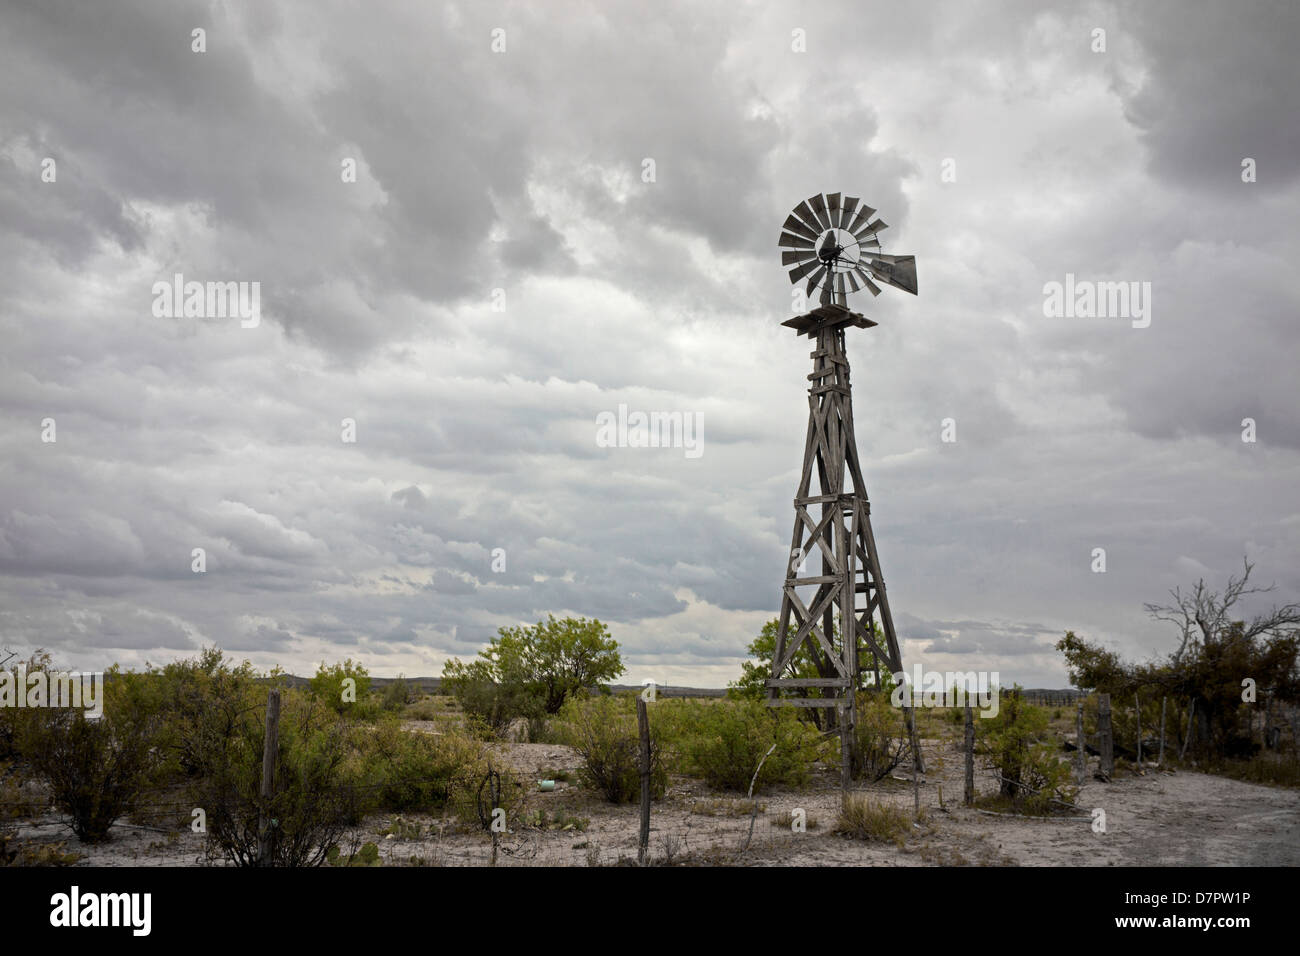 Old windmill us to pump water in the Big Bend region of West Texas. Stock Photo